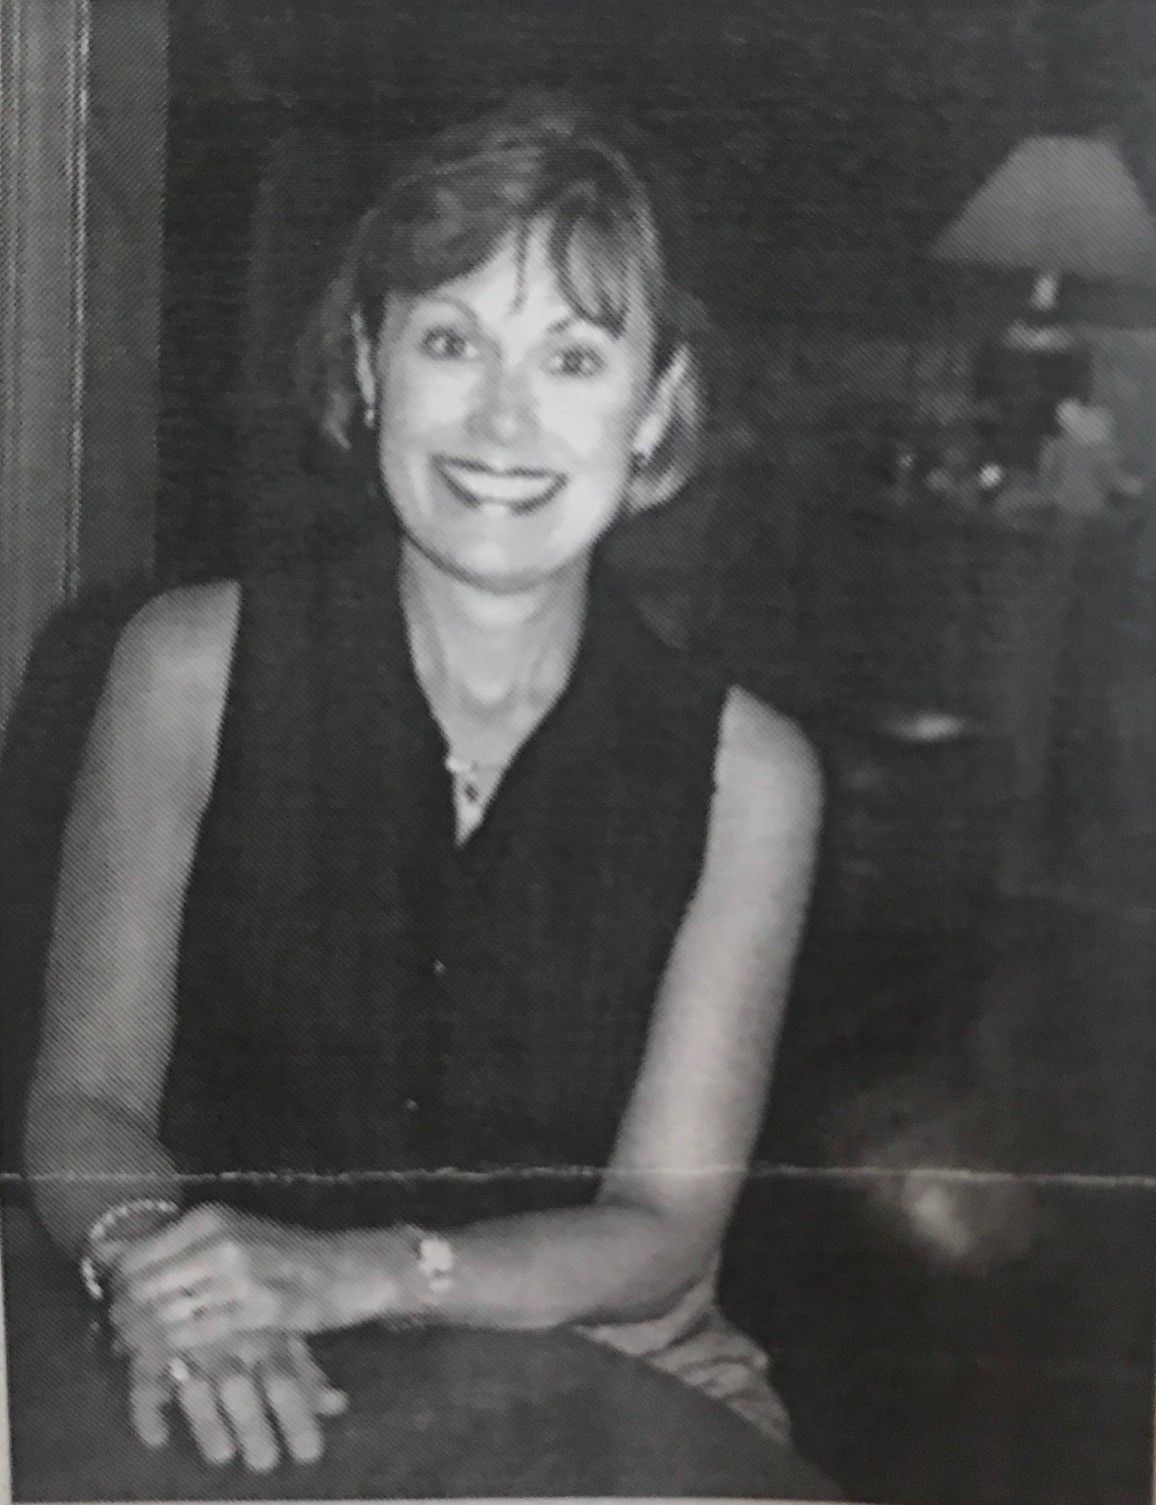 2001 – Pickens County Habitat hires first executive director.